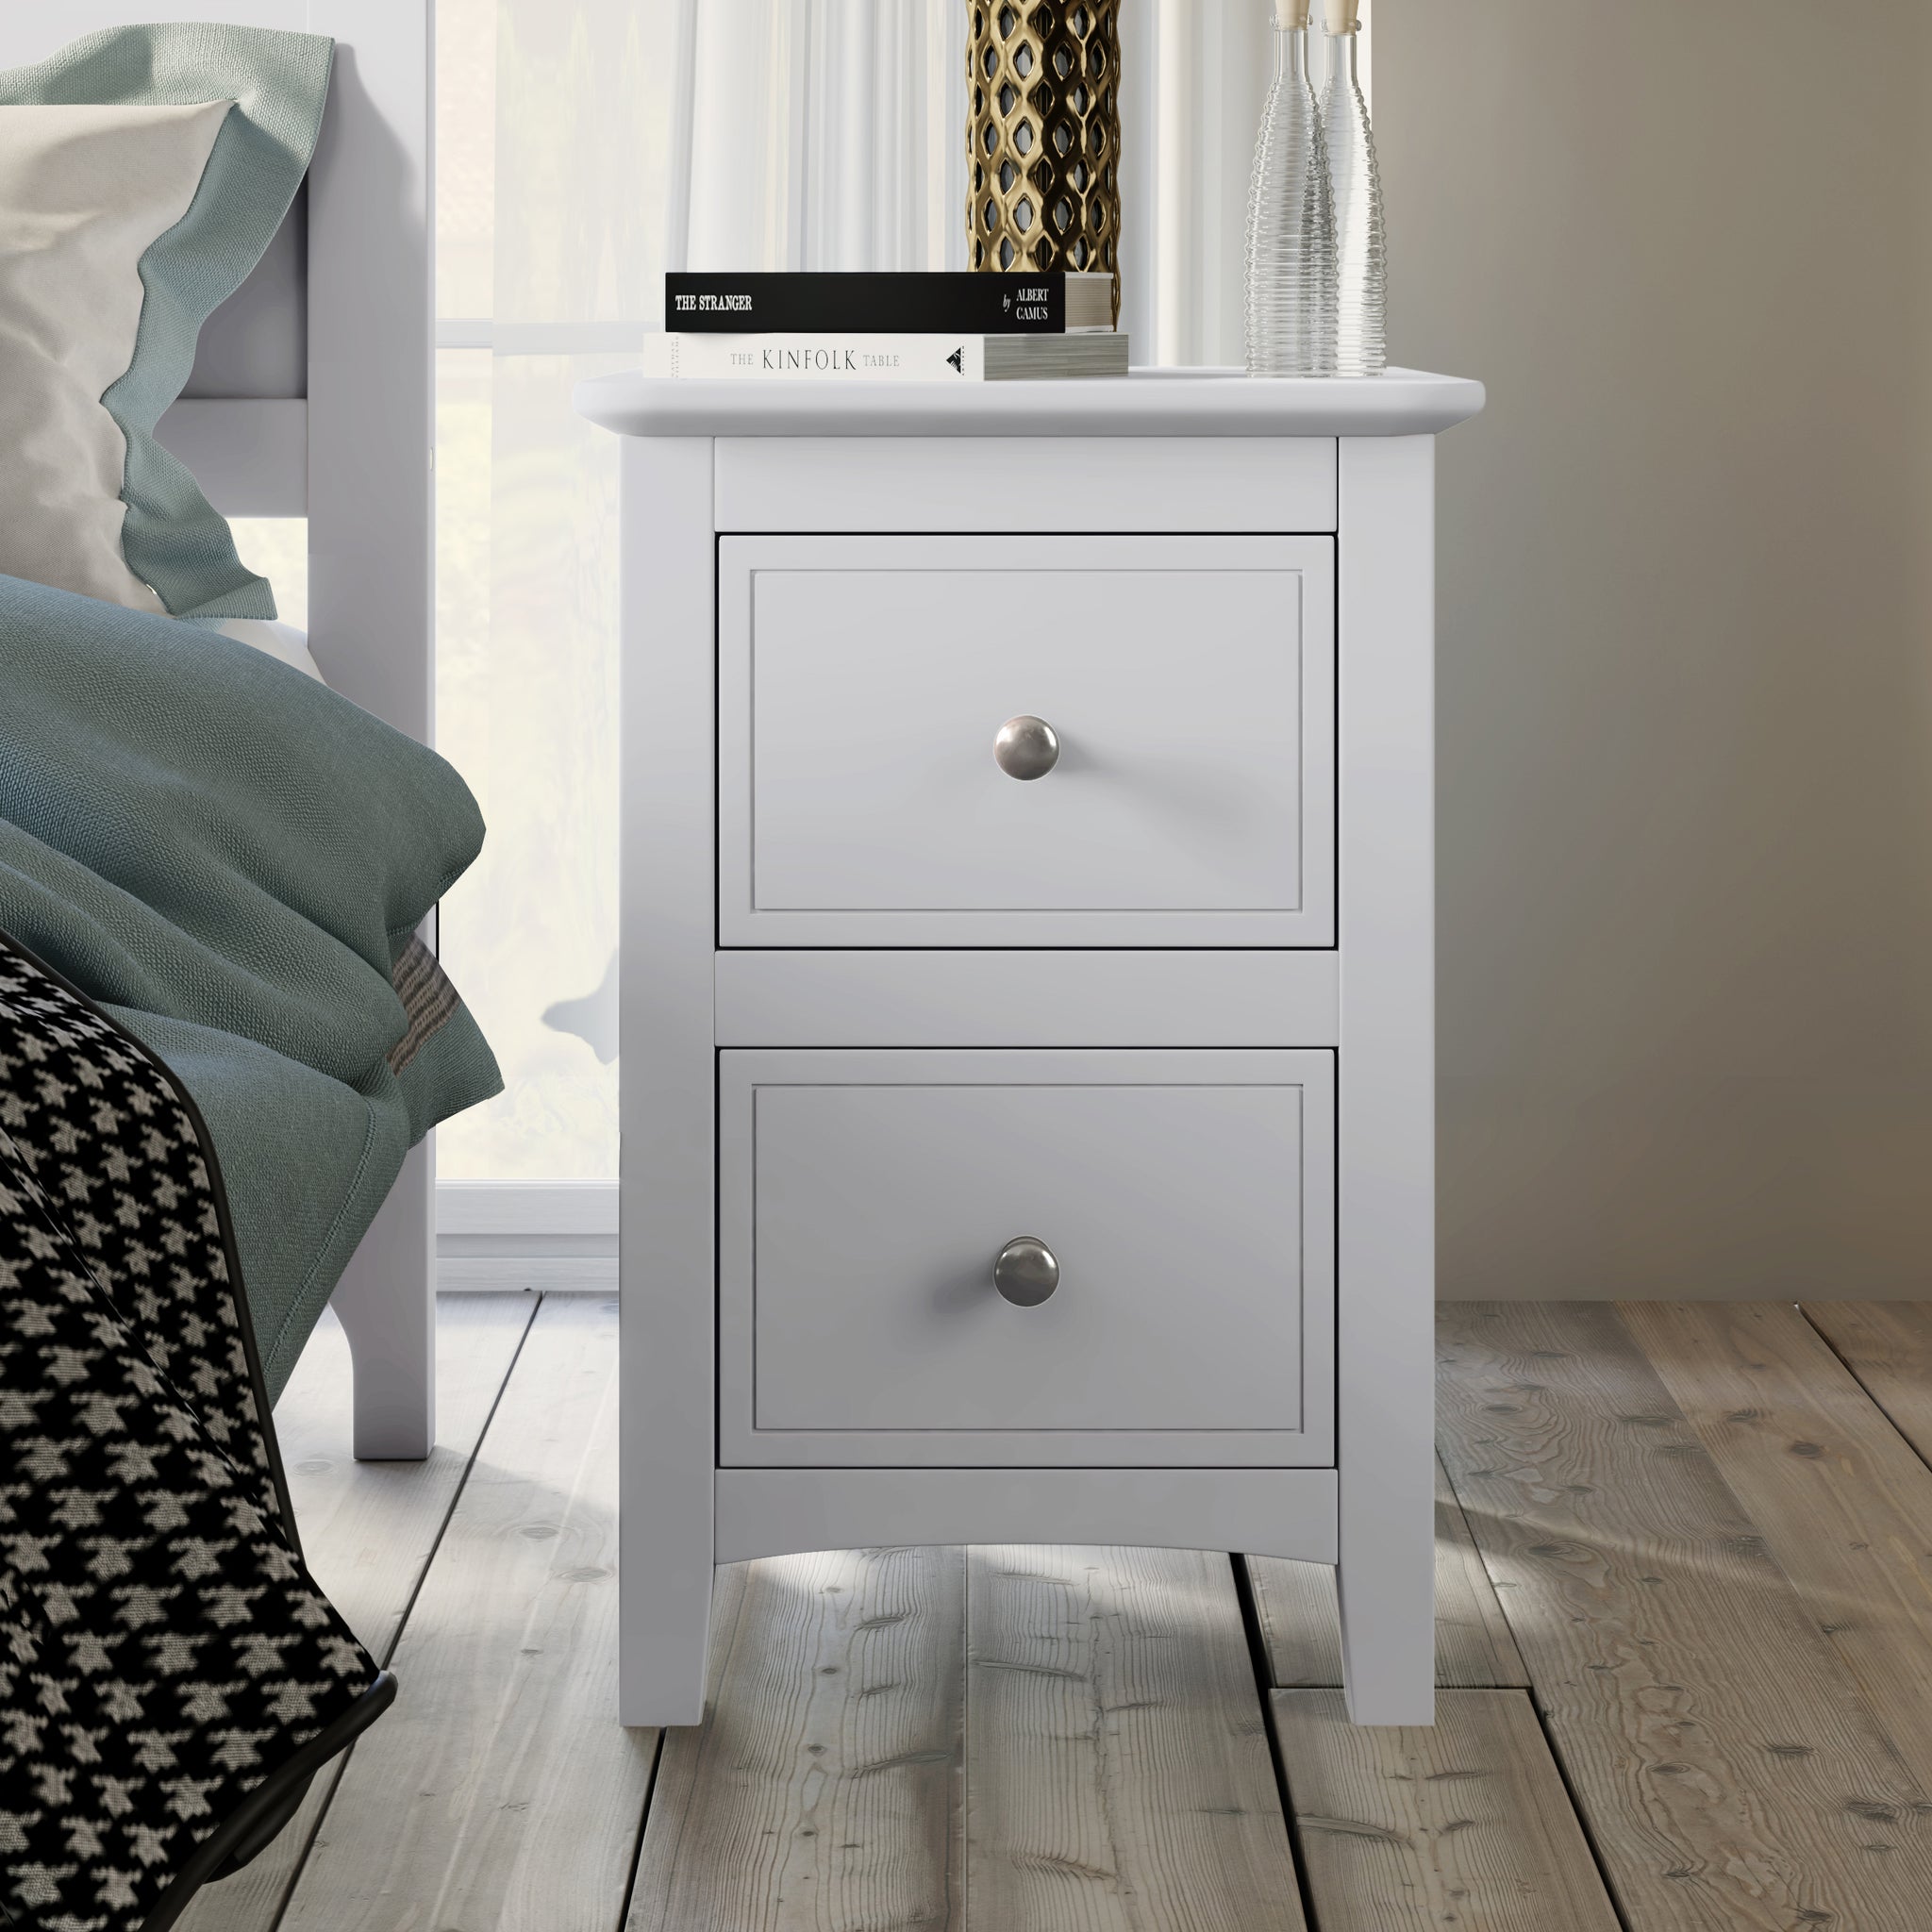 2 Drawers Solid Wood Nightstand End Table in White white-solid wood